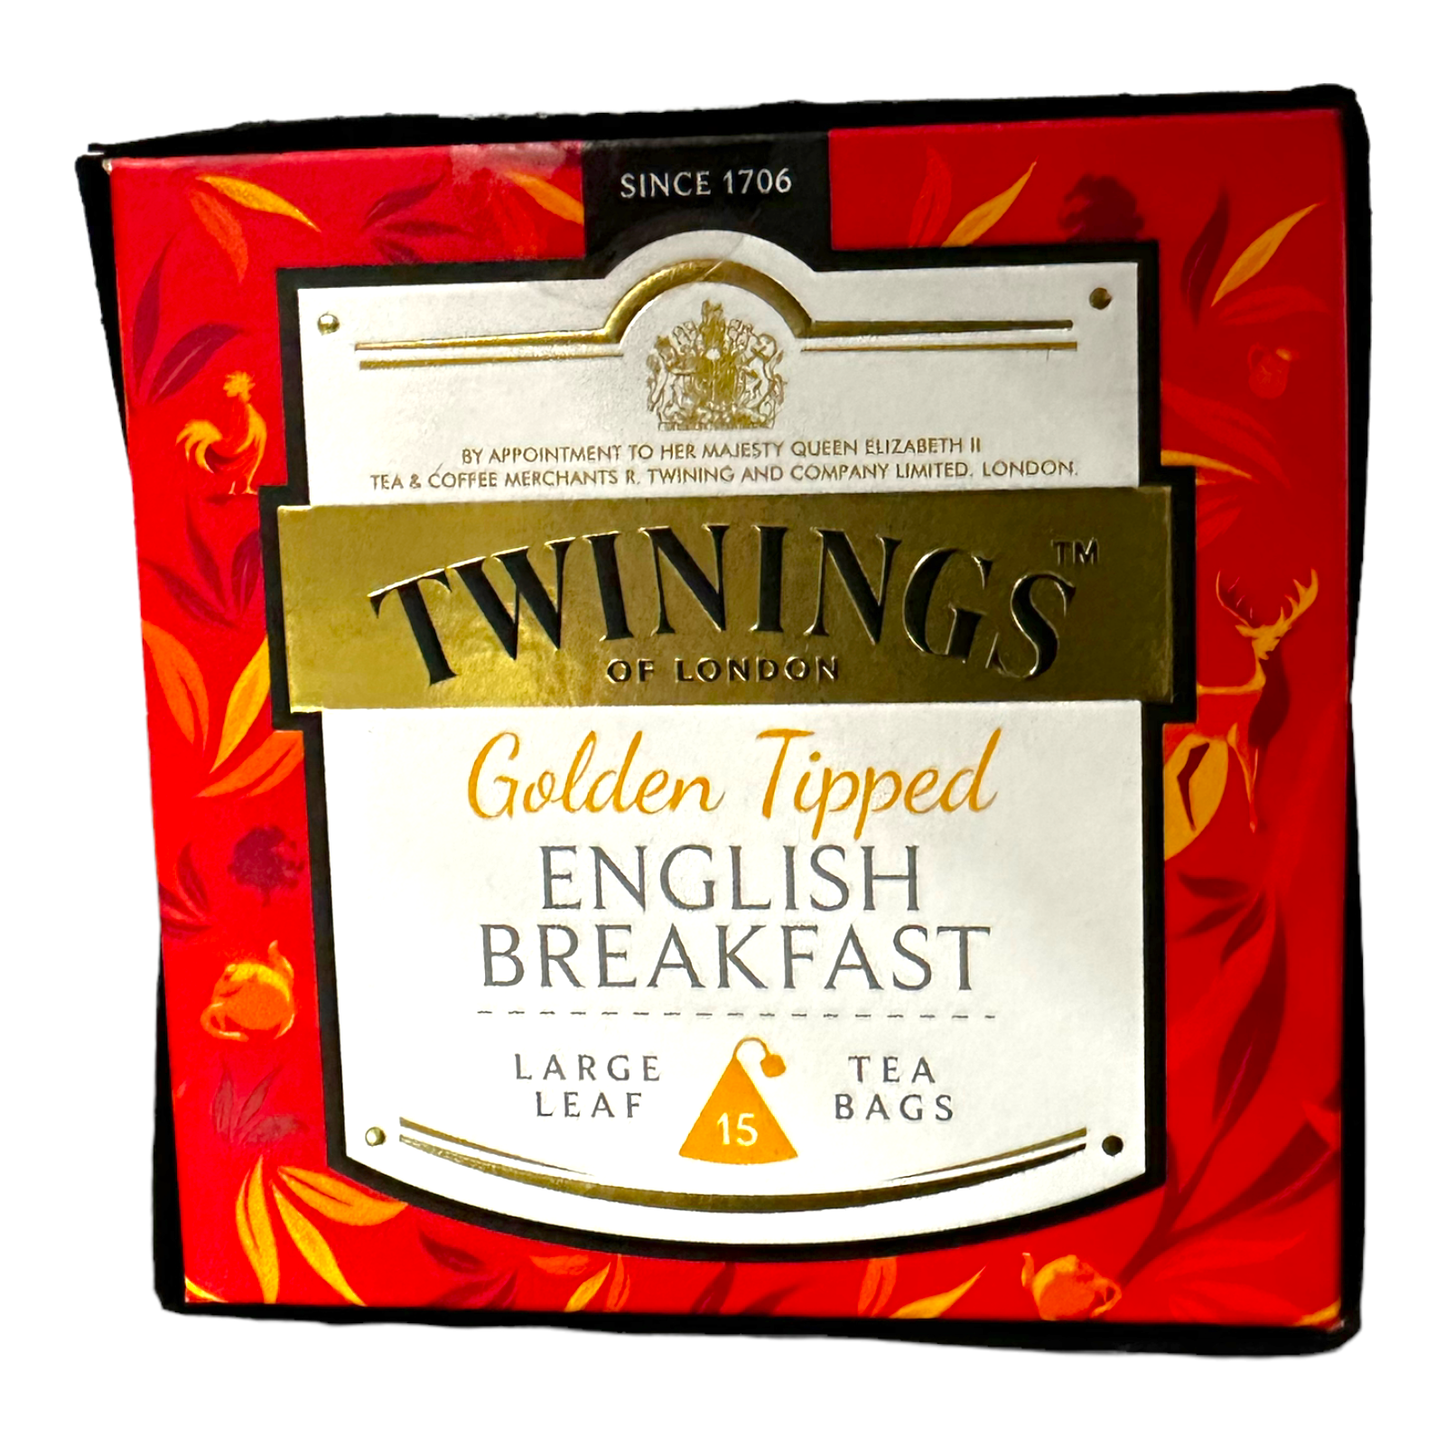 Twinings of London Golden Tipped English Breakfast 15 ct Large Leaf Tea Bags